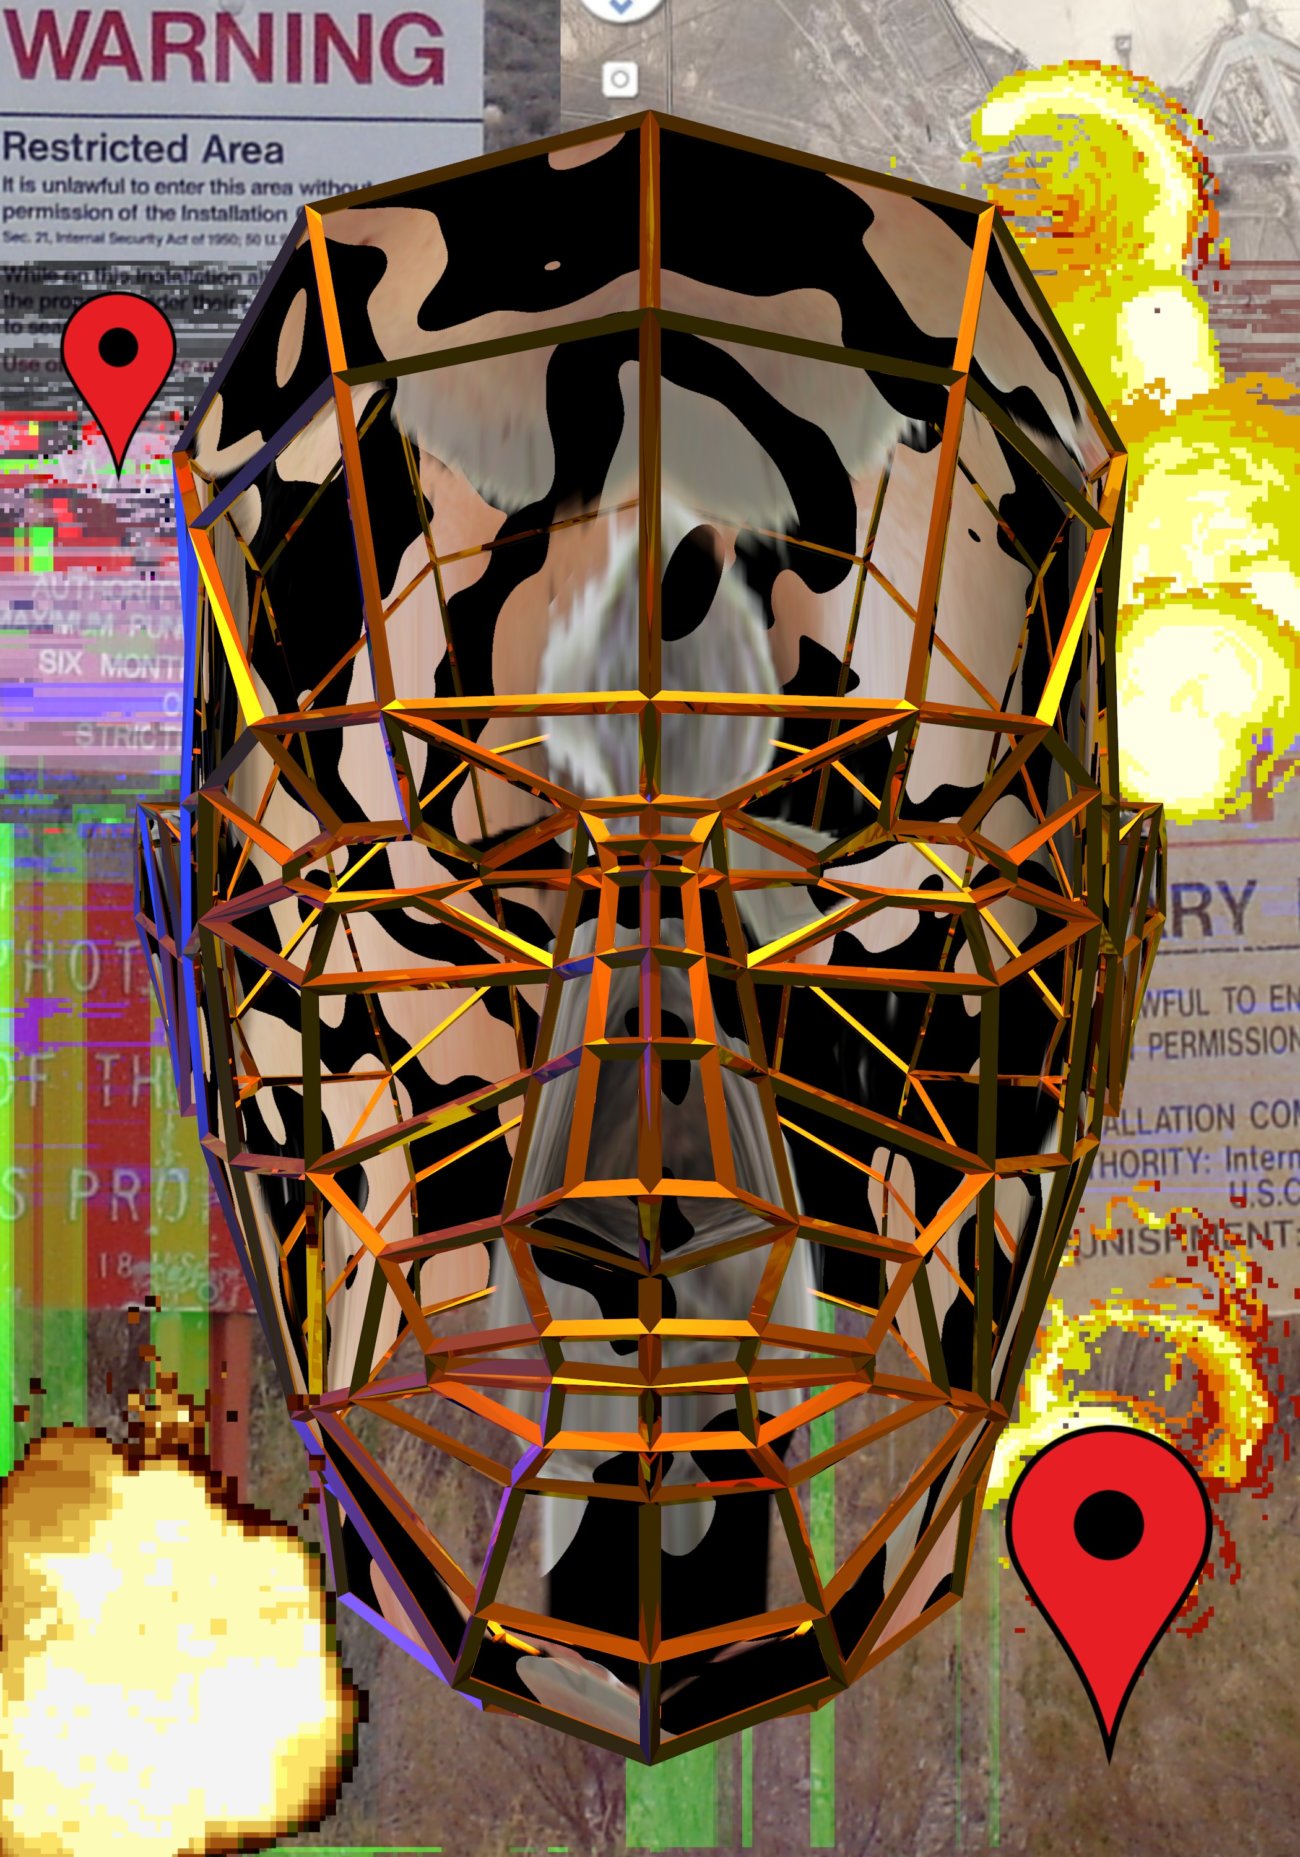 Digital art image of metakllic skull with gold frame and abstract background